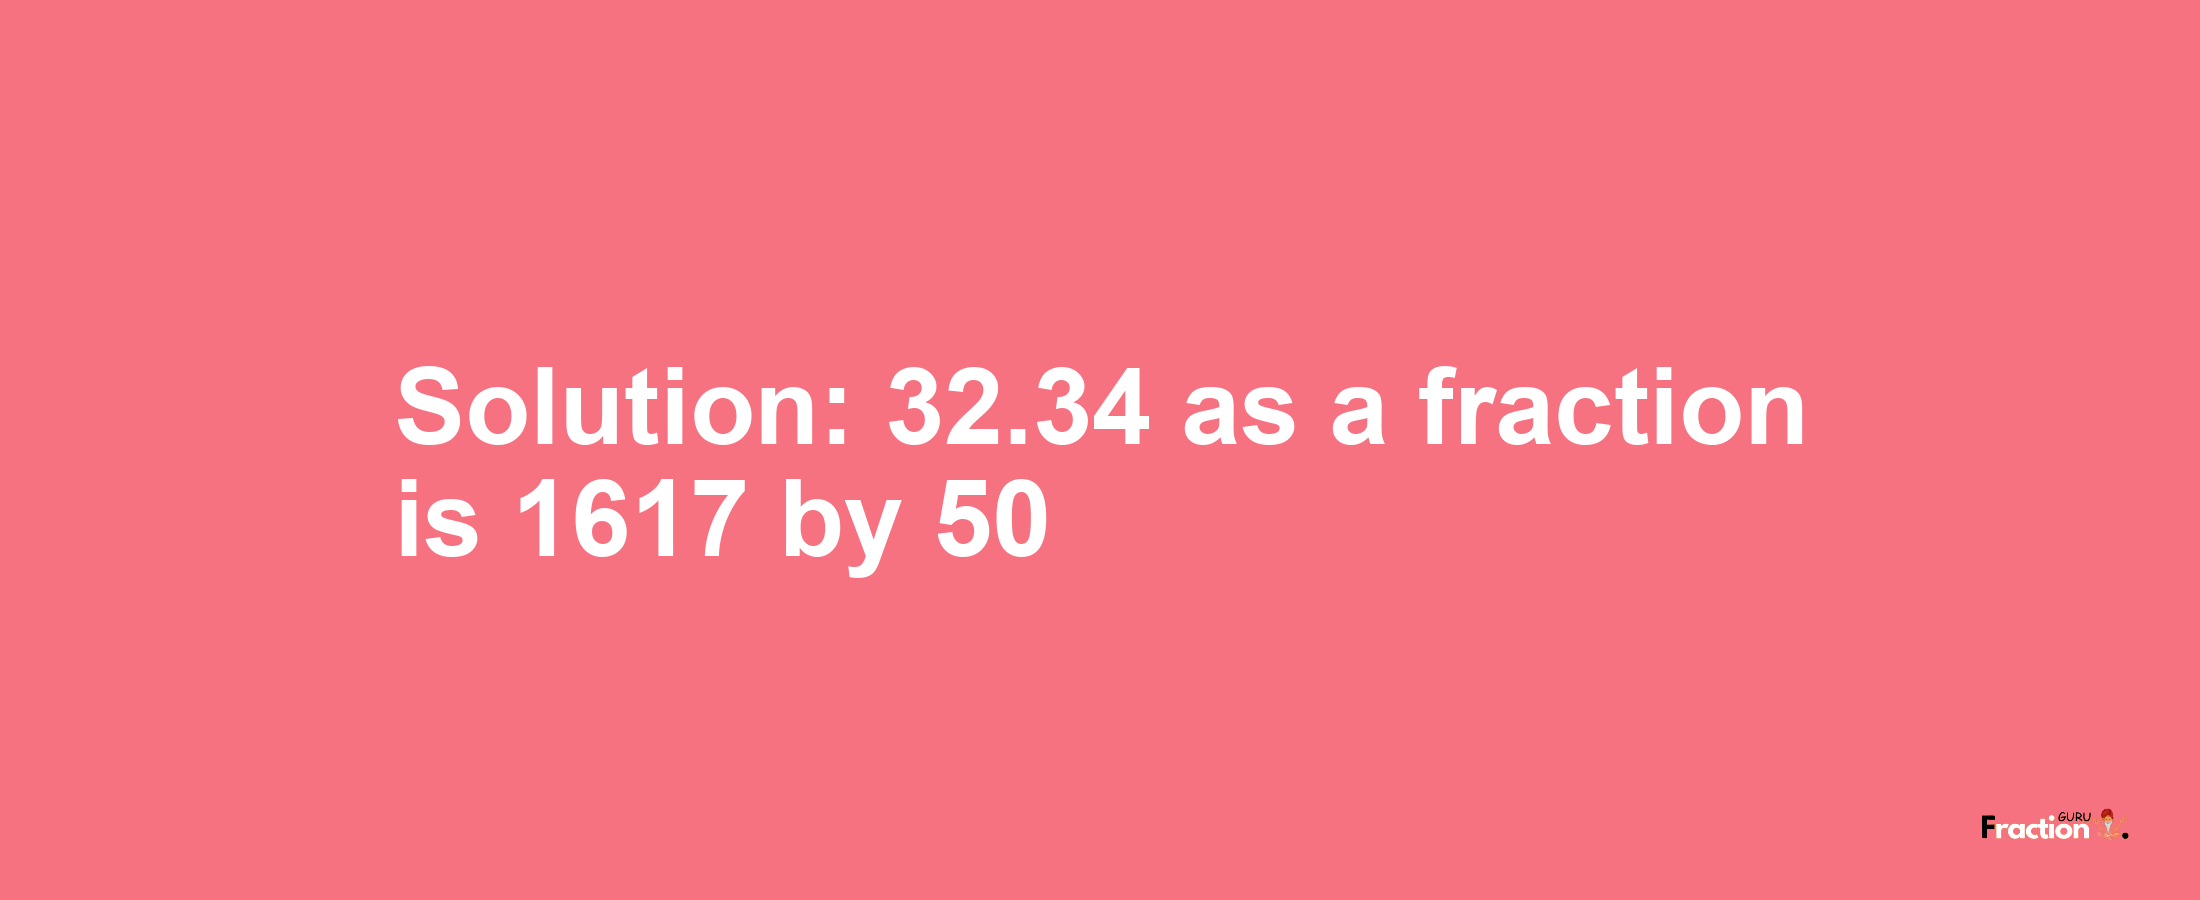 Solution:32.34 as a fraction is 1617/50